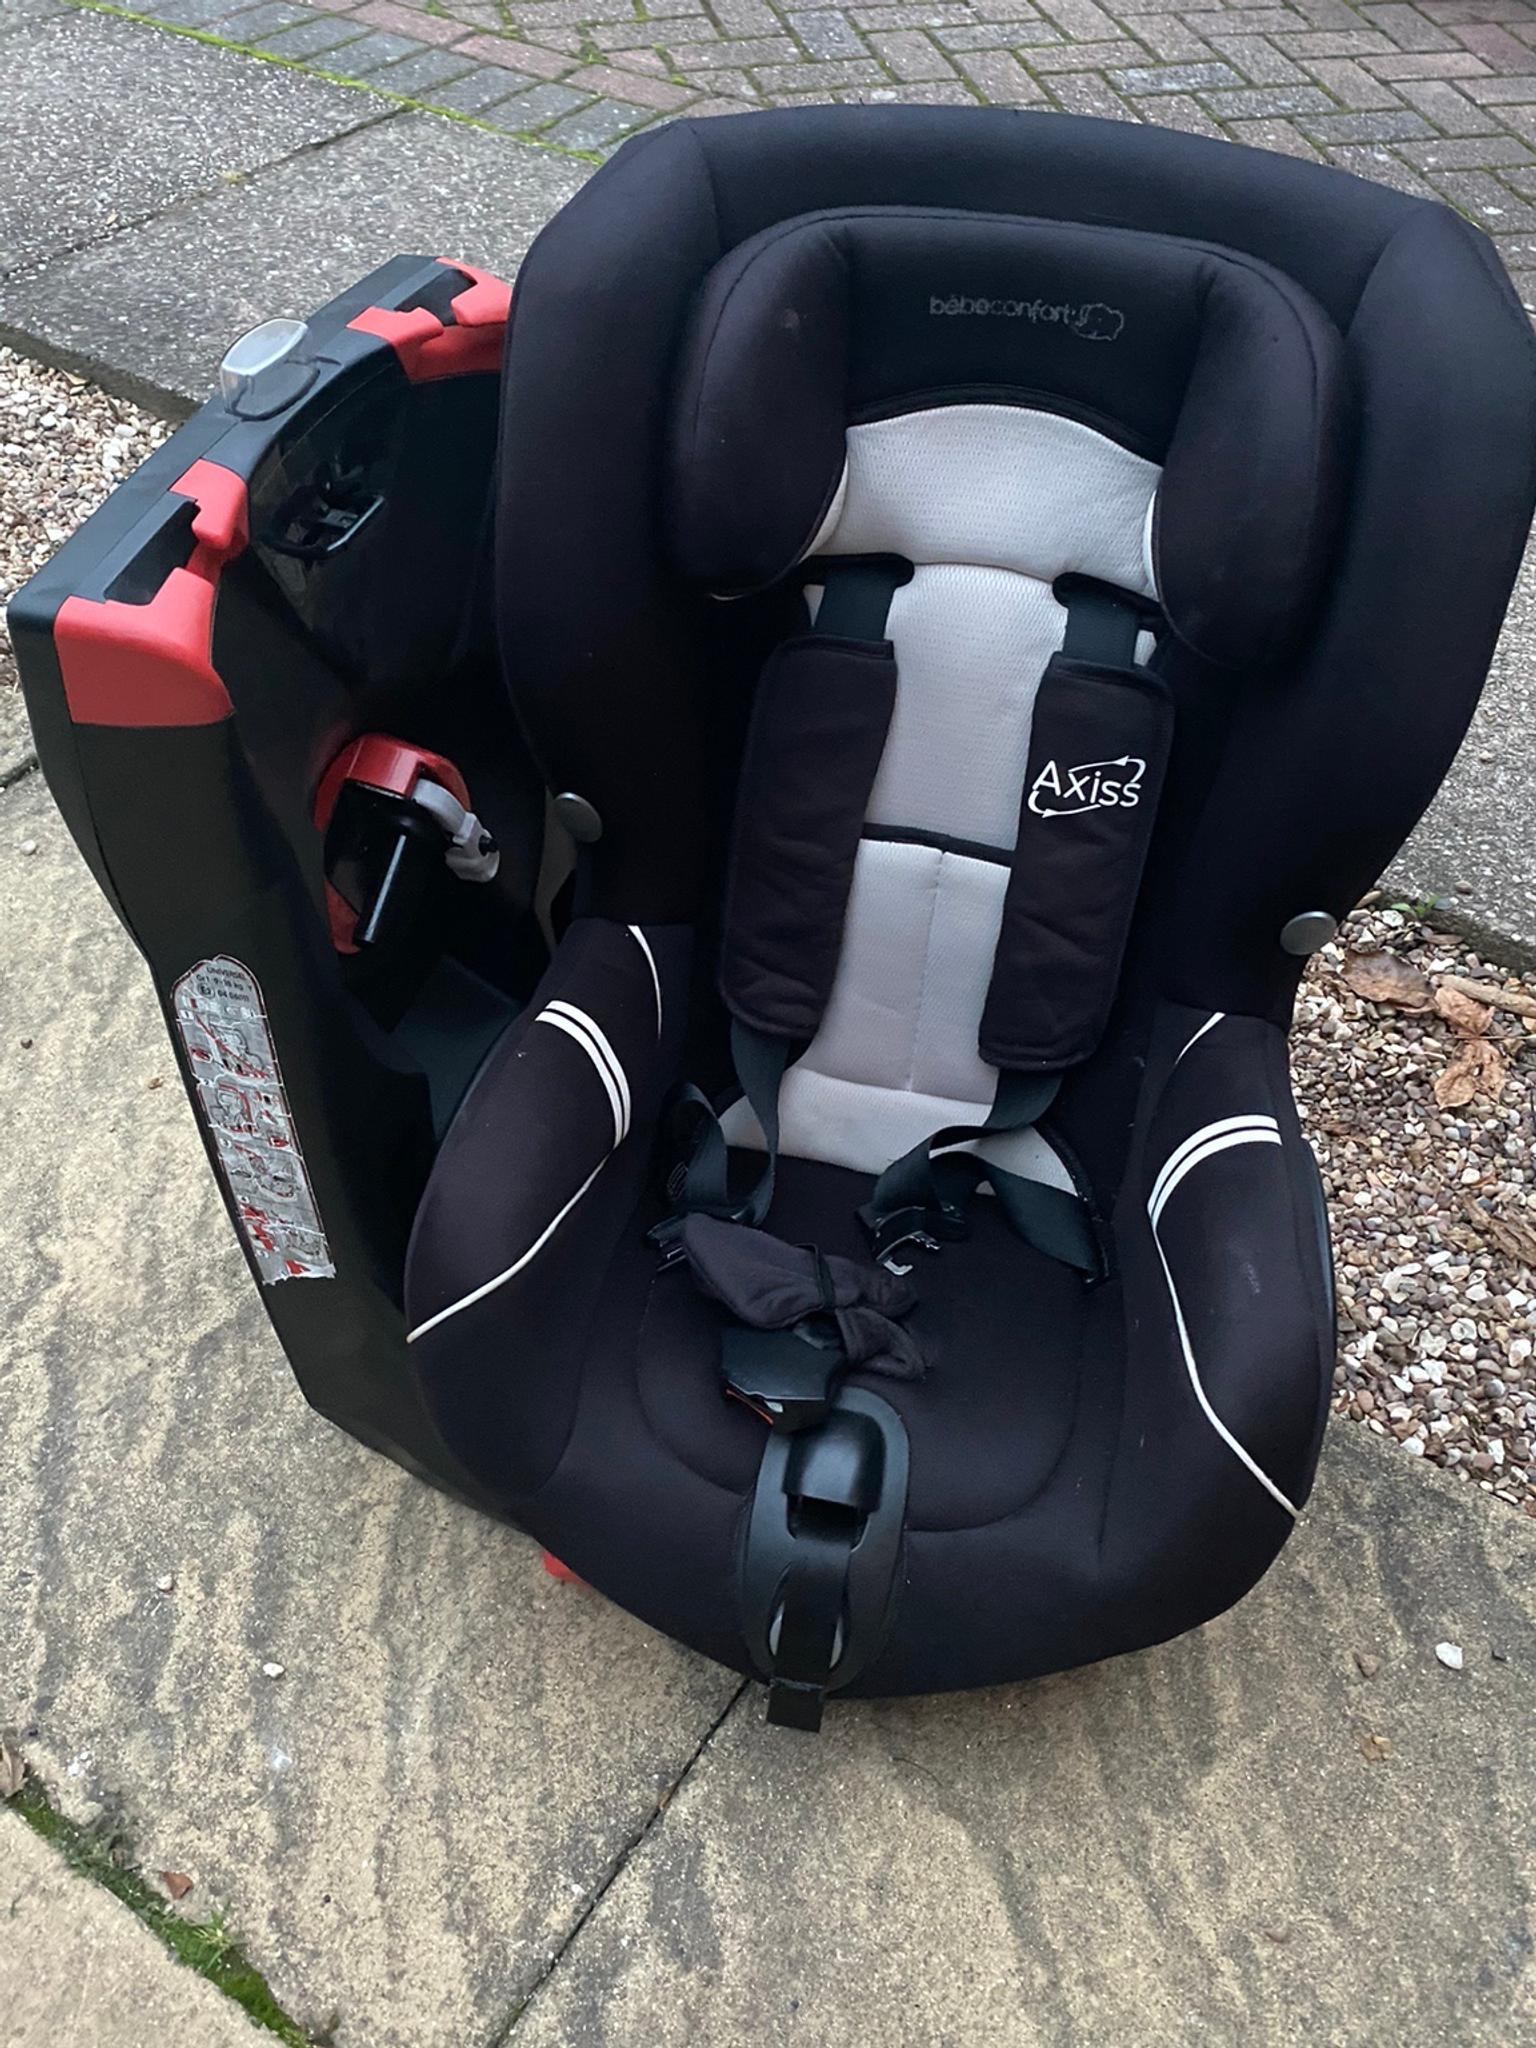 Axiss swivel car seat in B32 Birmingham for £35.00 for sale Shpock